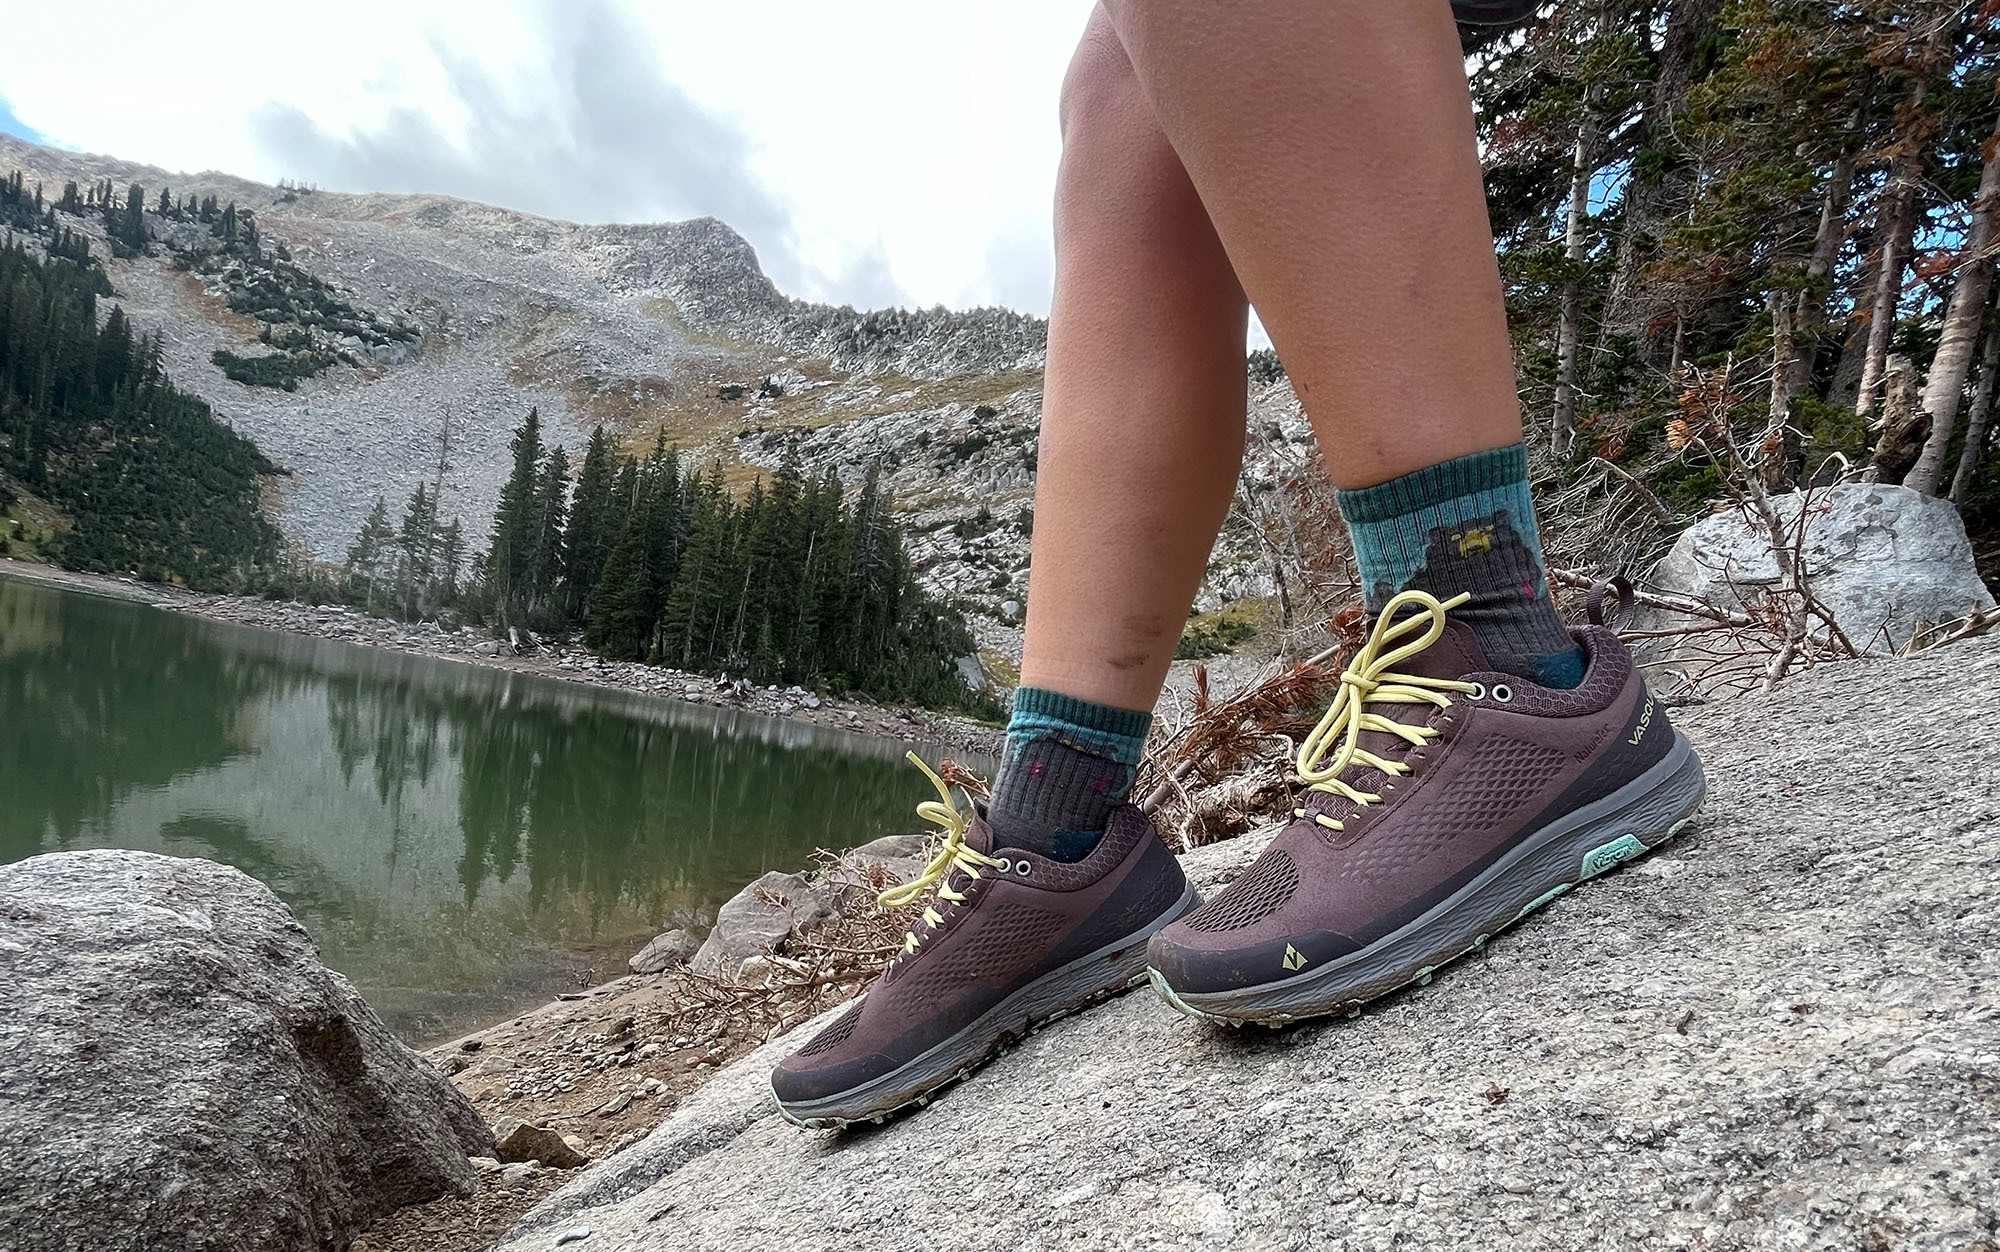 The Breeze hiking shoes grip onto steep inclines without a problem.